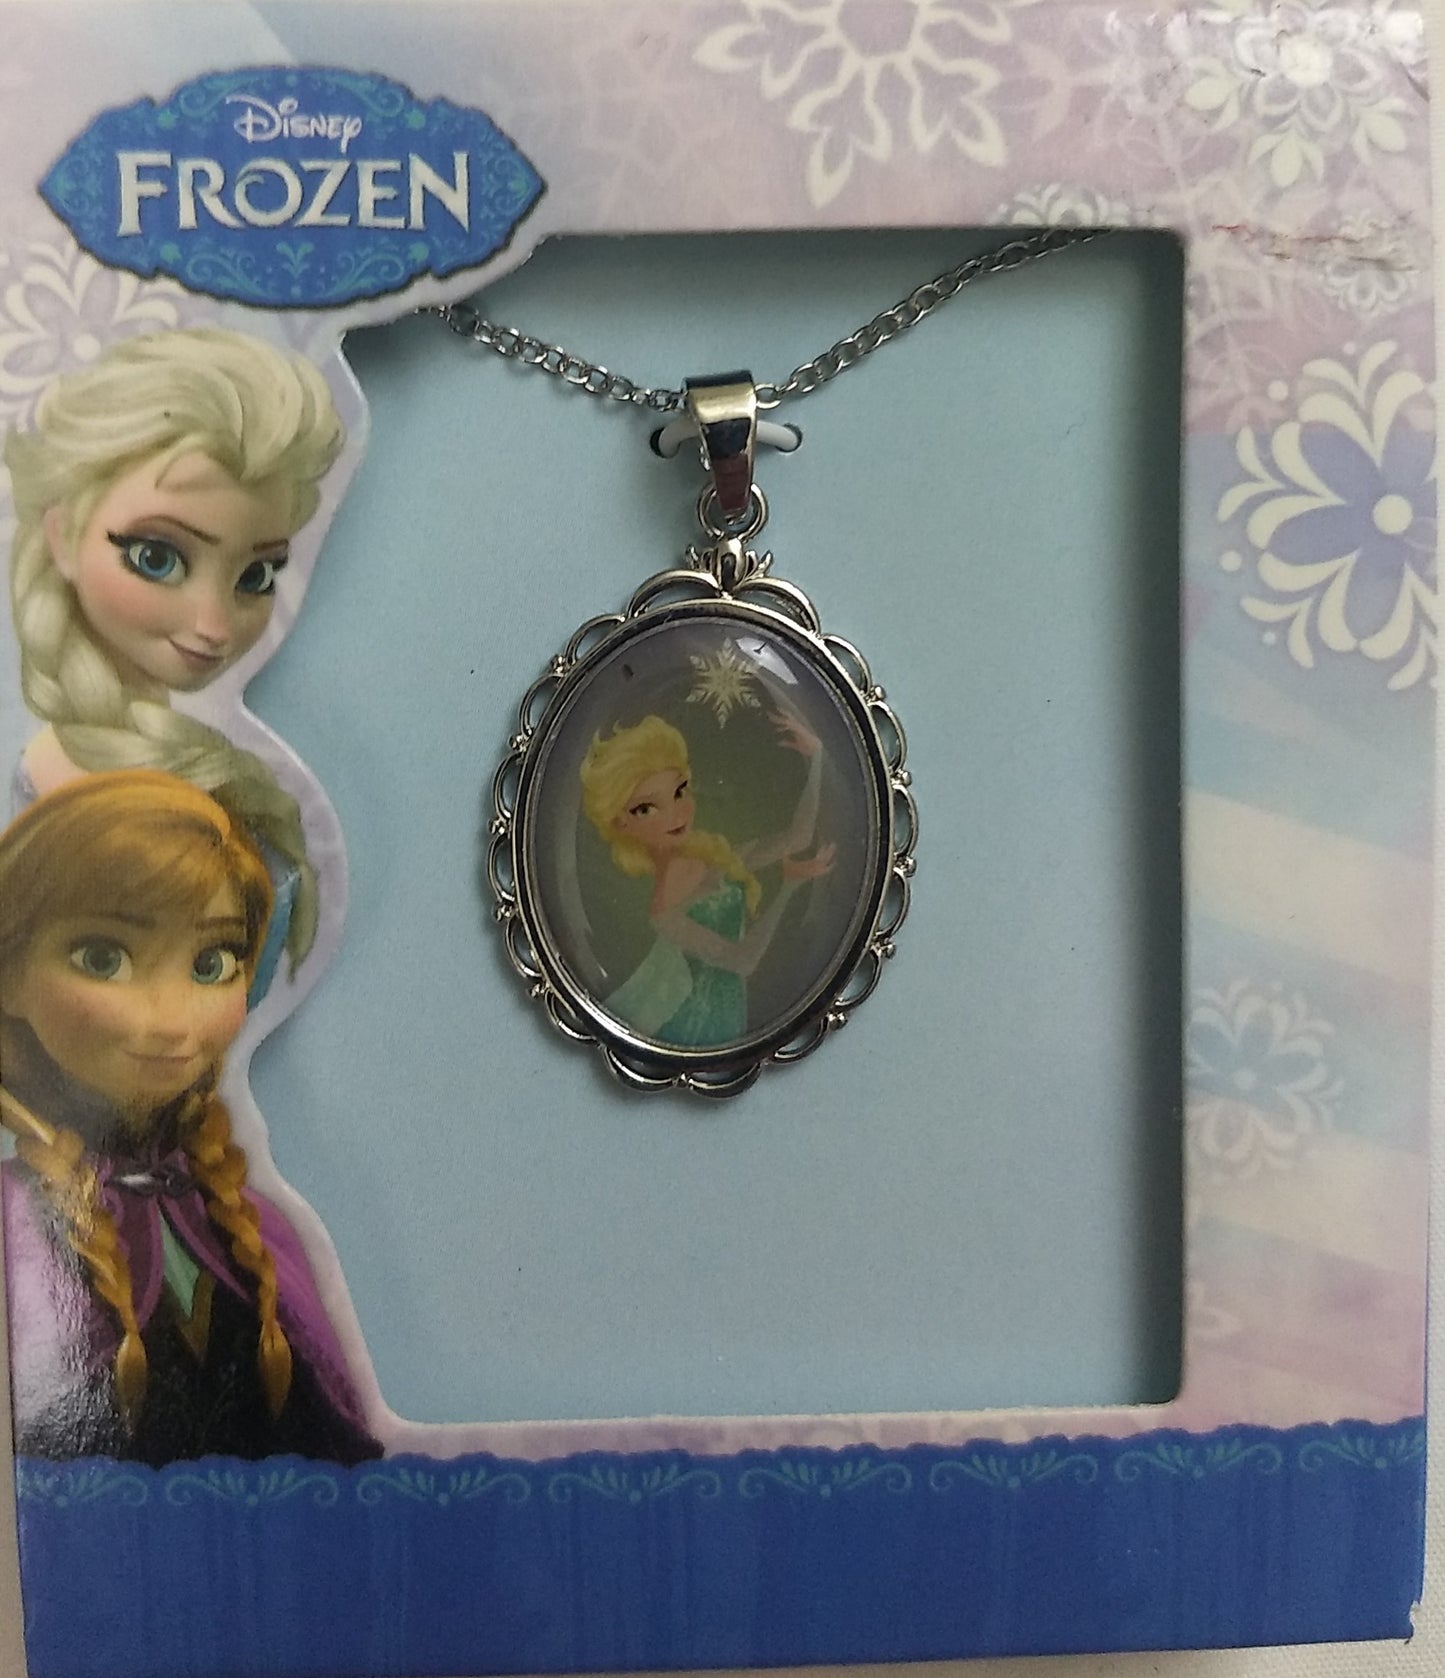 Disney Princess Elsa Oval Pendant Necklace 16" Chain with 2" Extension